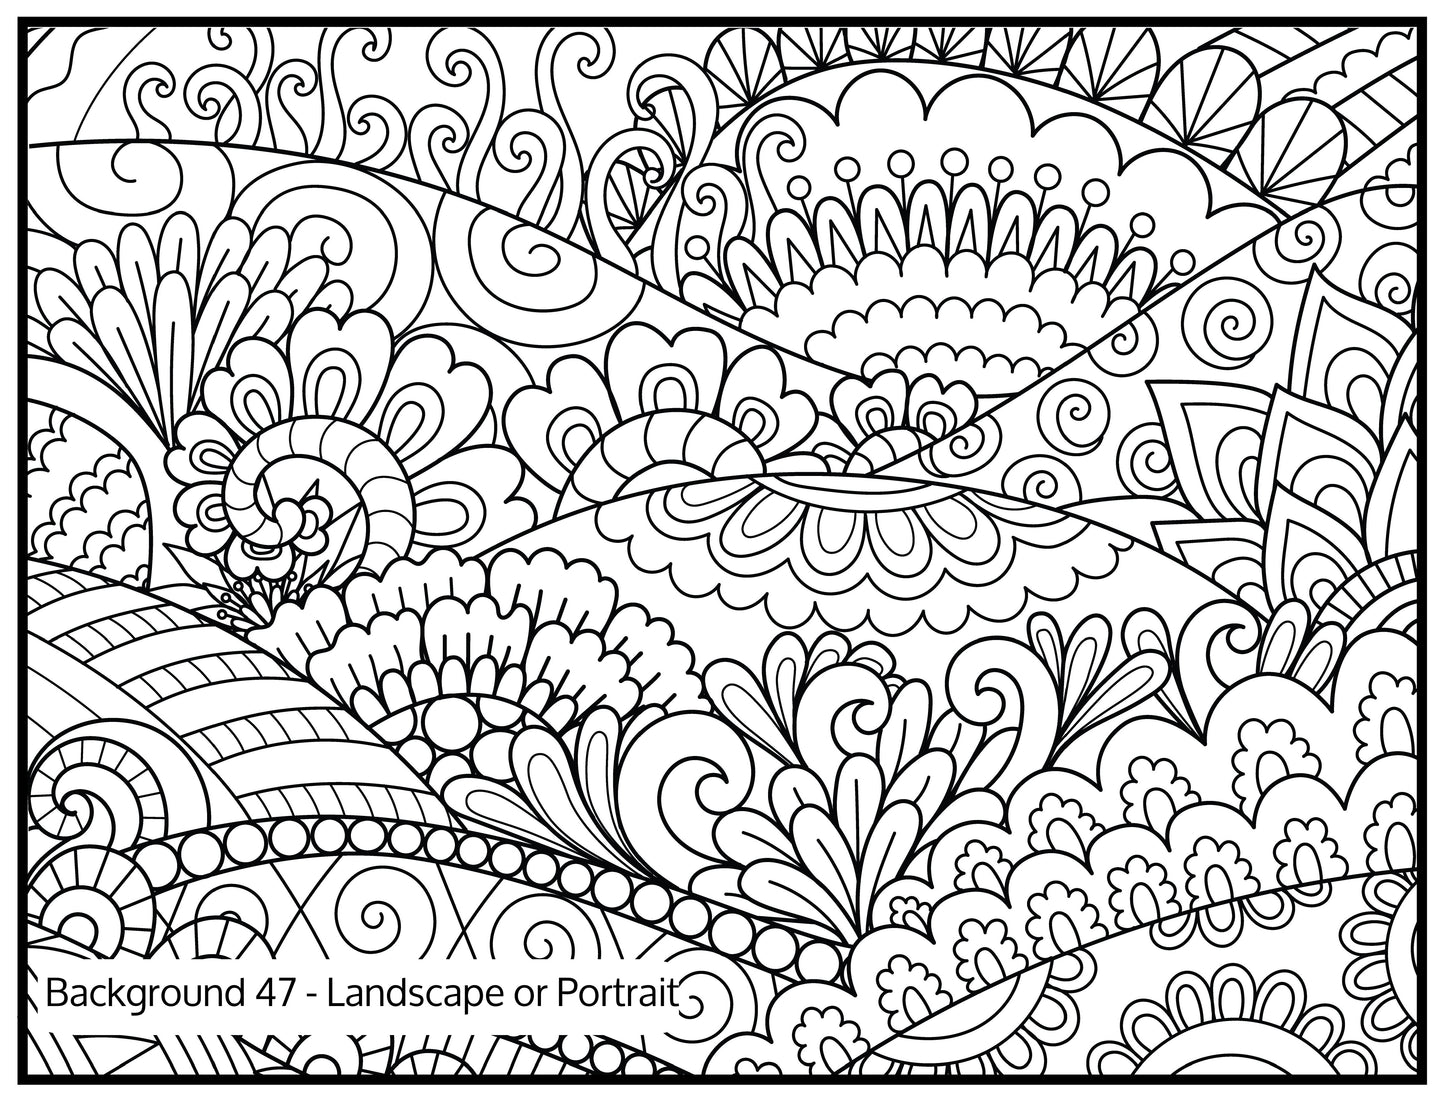 Background 47 Custom Personalized Giant Coloring Poster 46"x60"